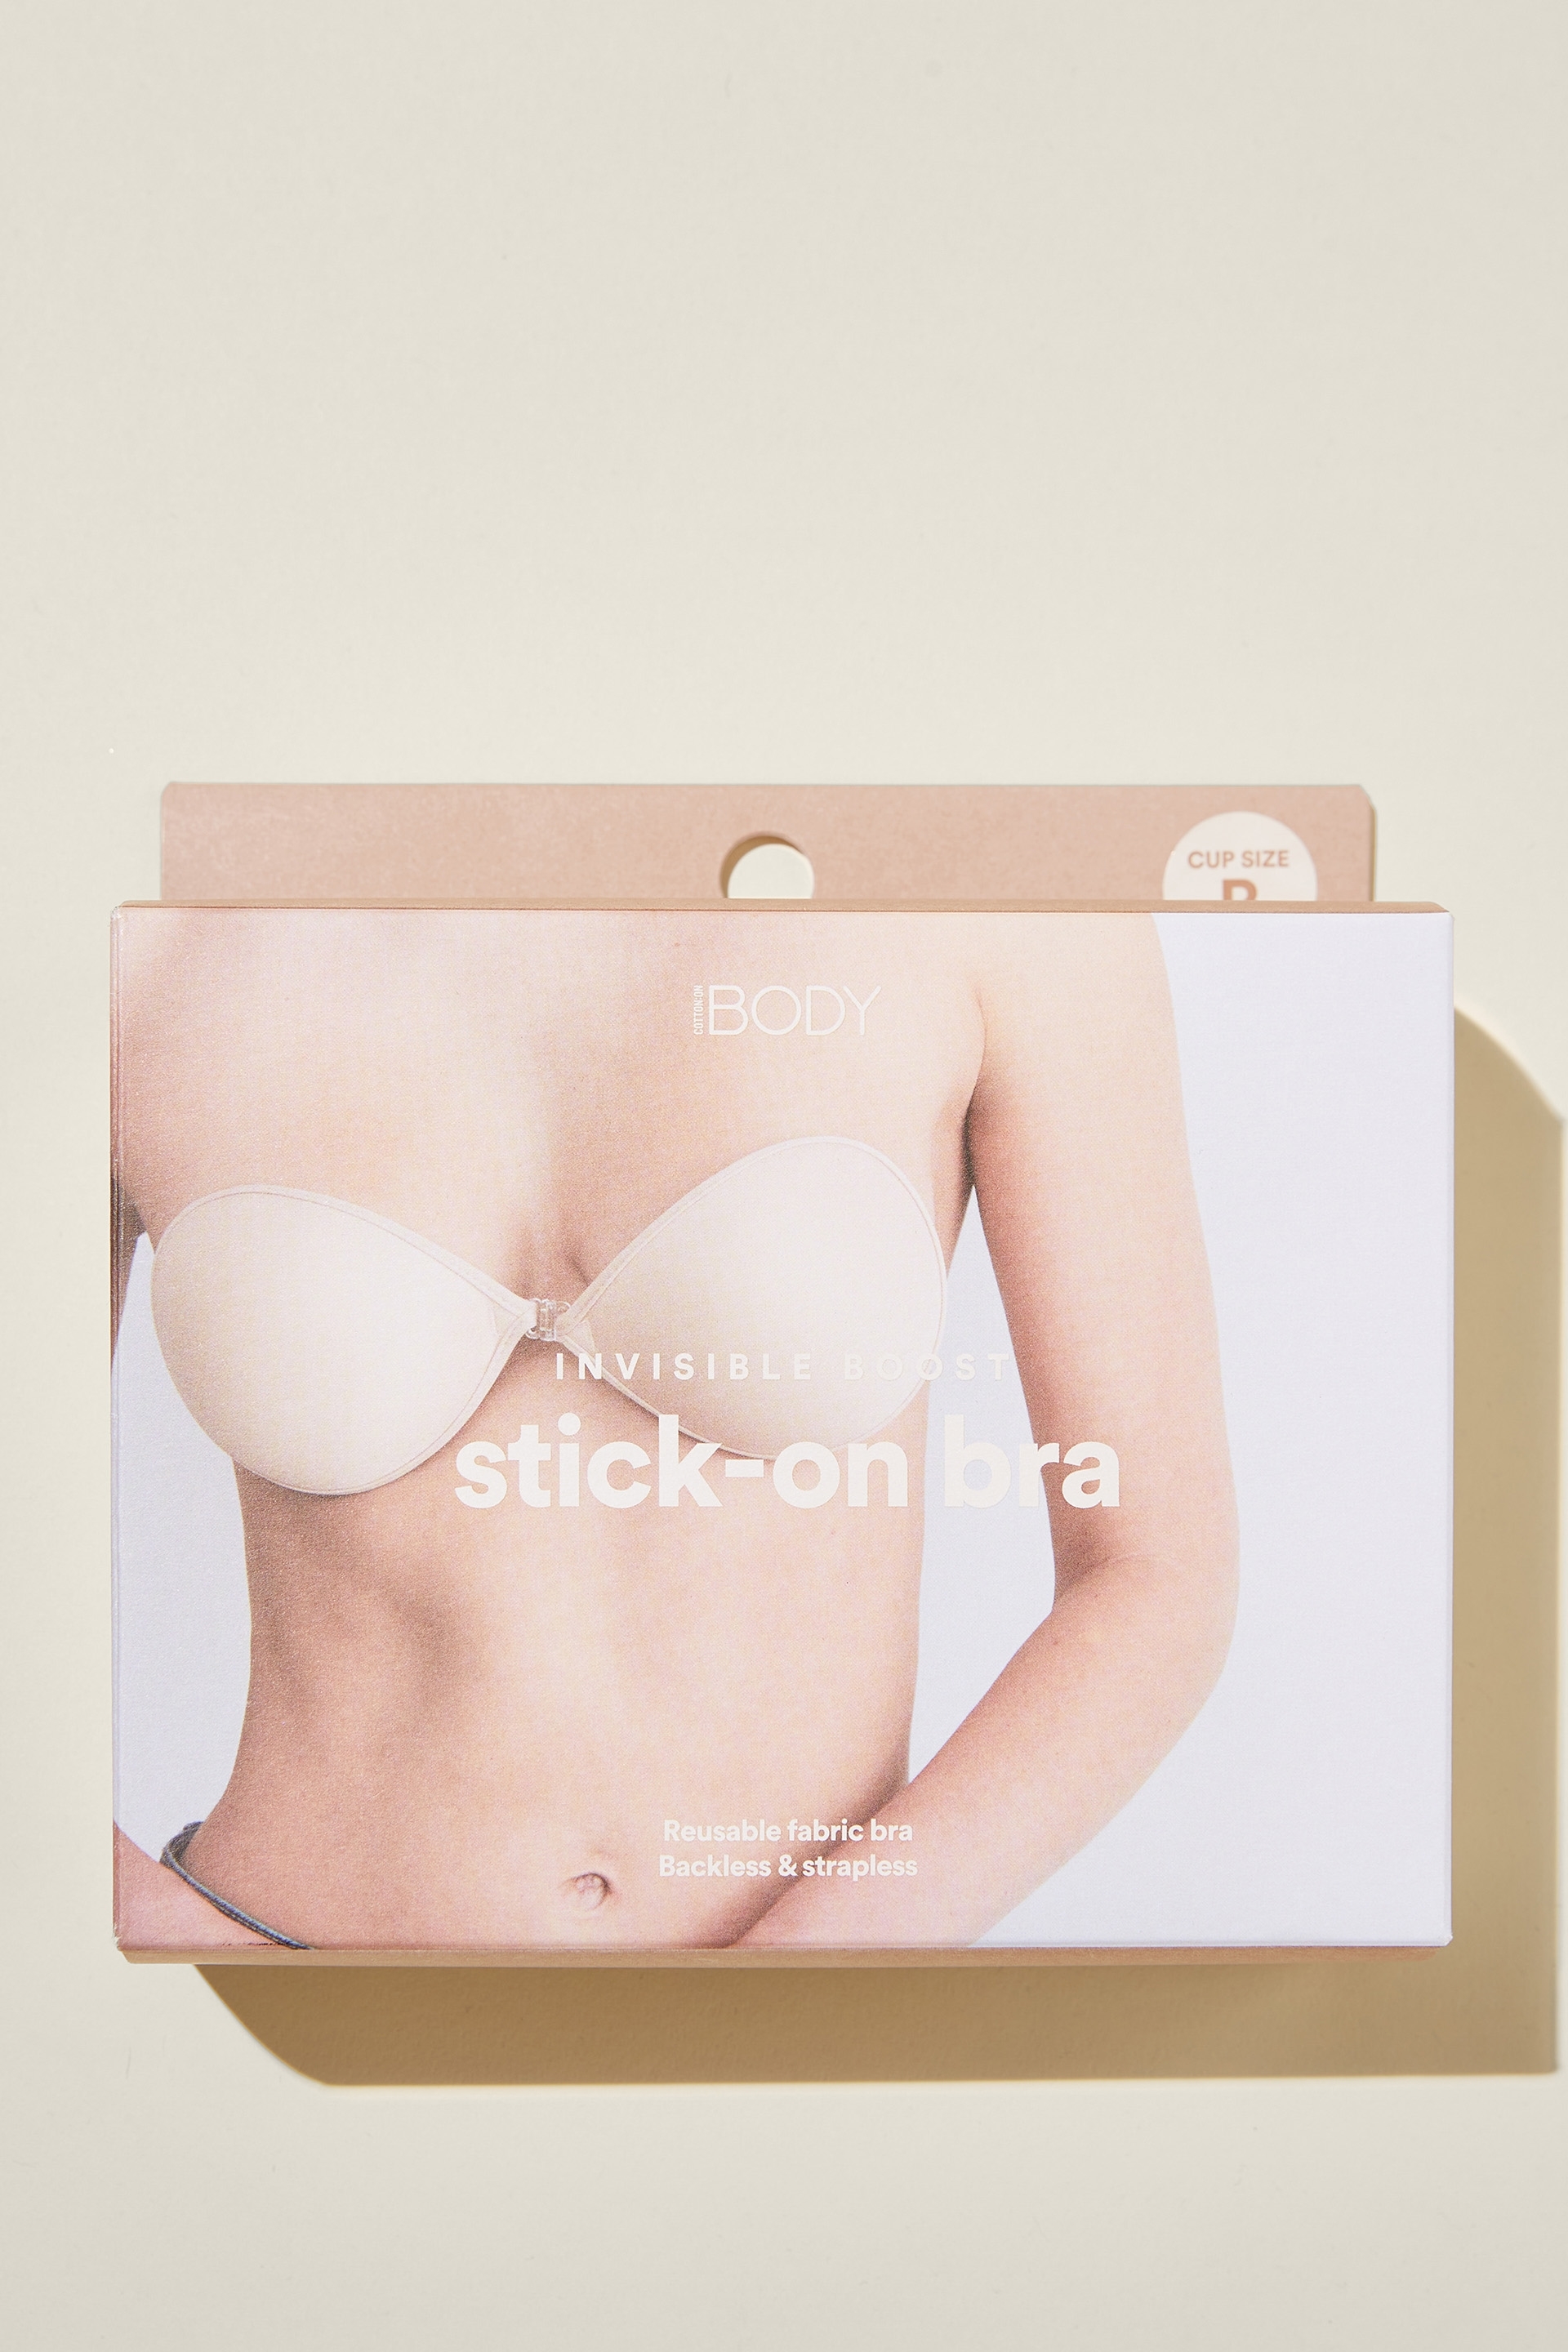 Buy Invisible Stick On Stress Backless Bra In White Colours!! Cups